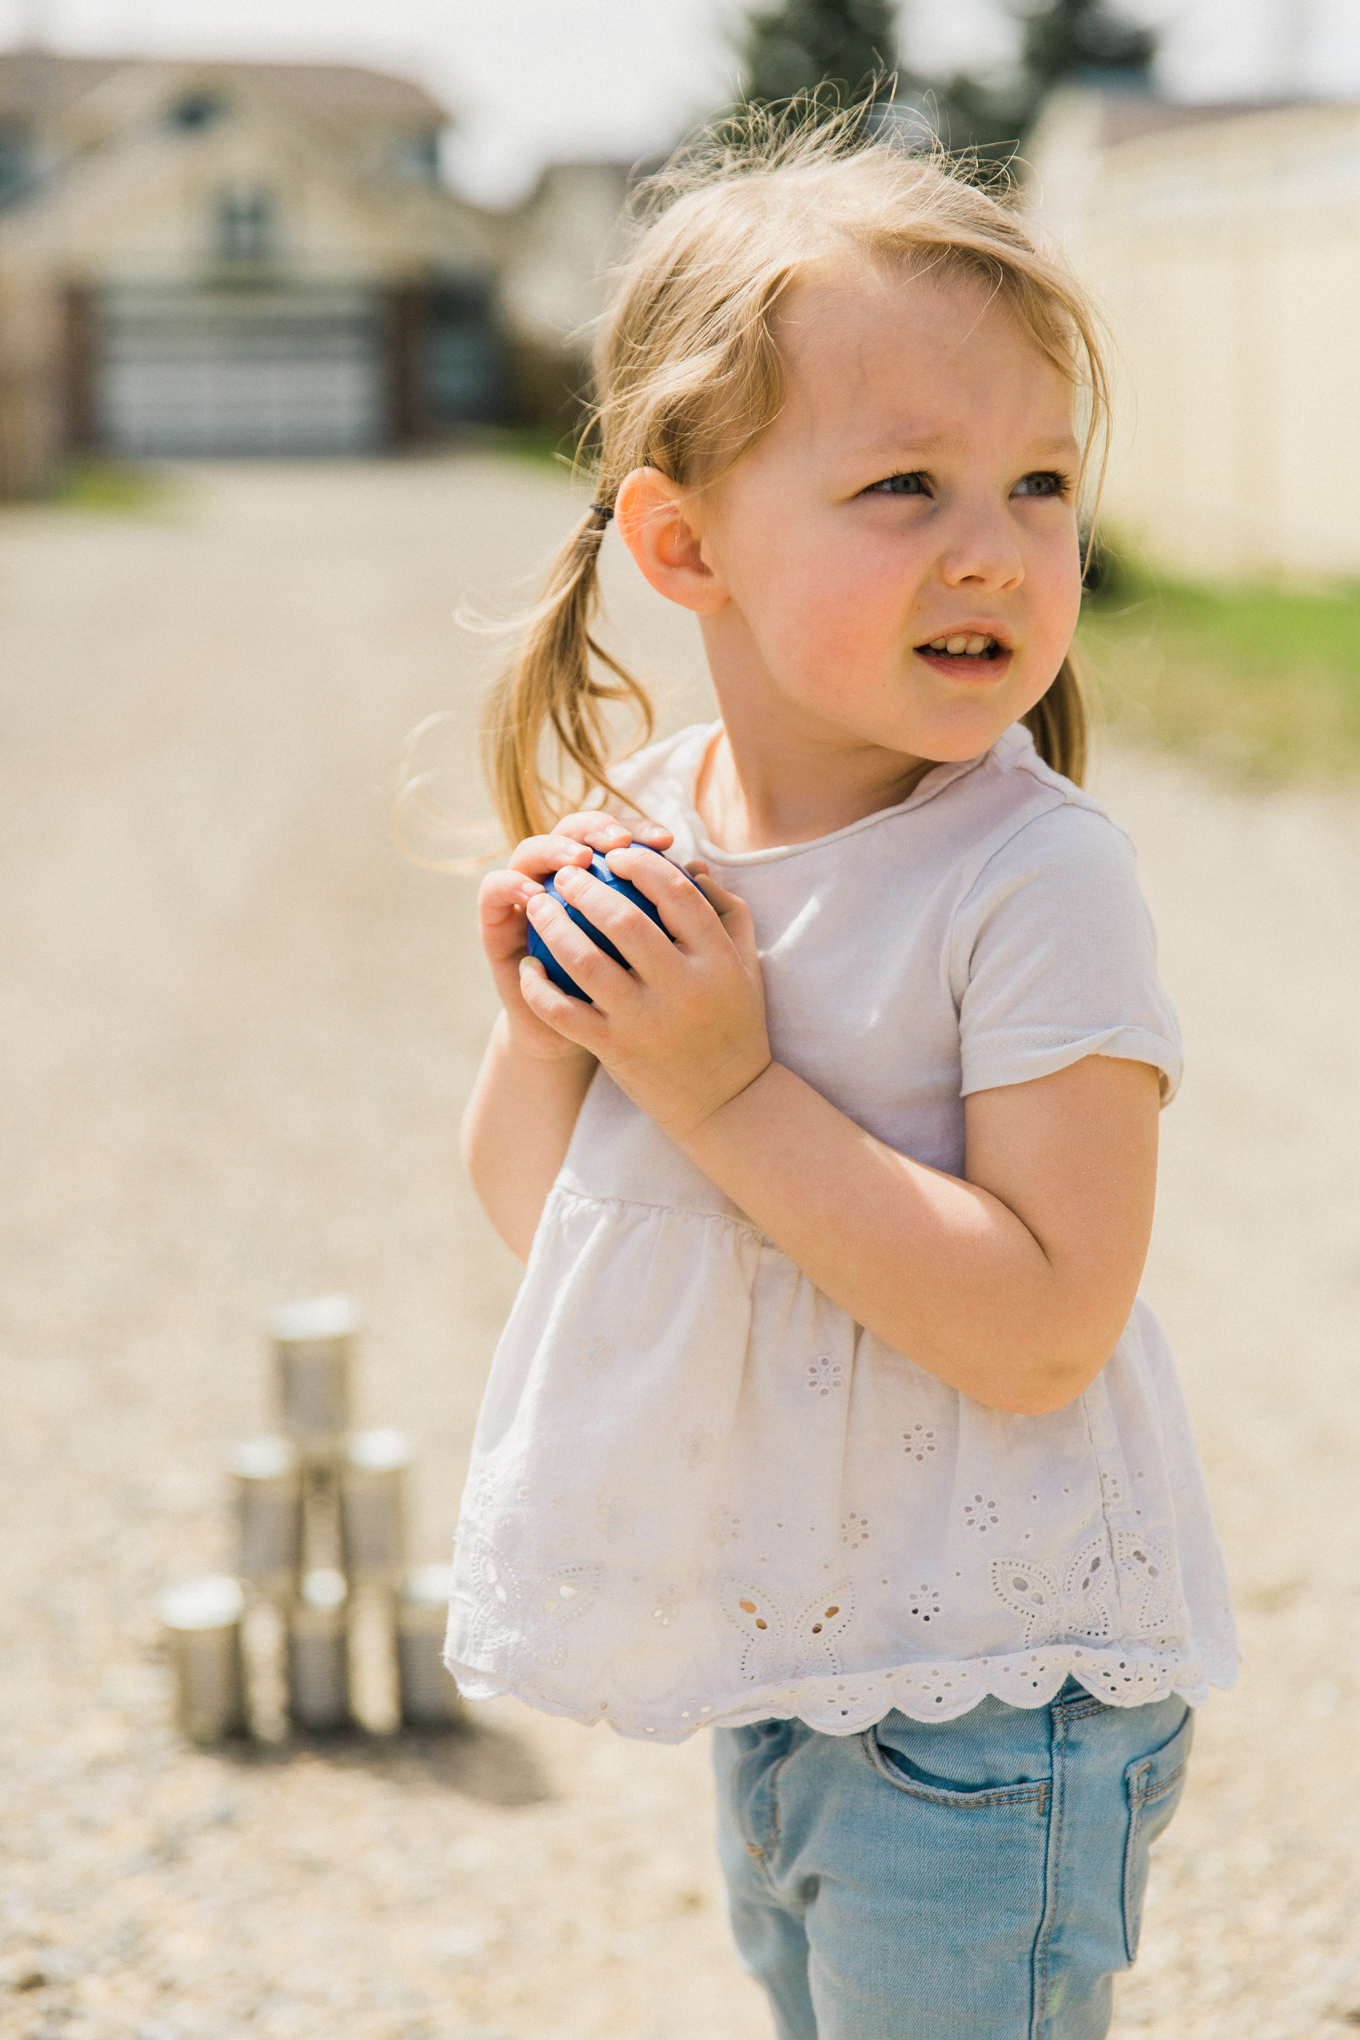 The benefits of simple play when it comes to a child's development are innumerable. This list of traditional children's games is a great place to start when it comes to ditching the screens and enjoying some good old-fashioned fun!